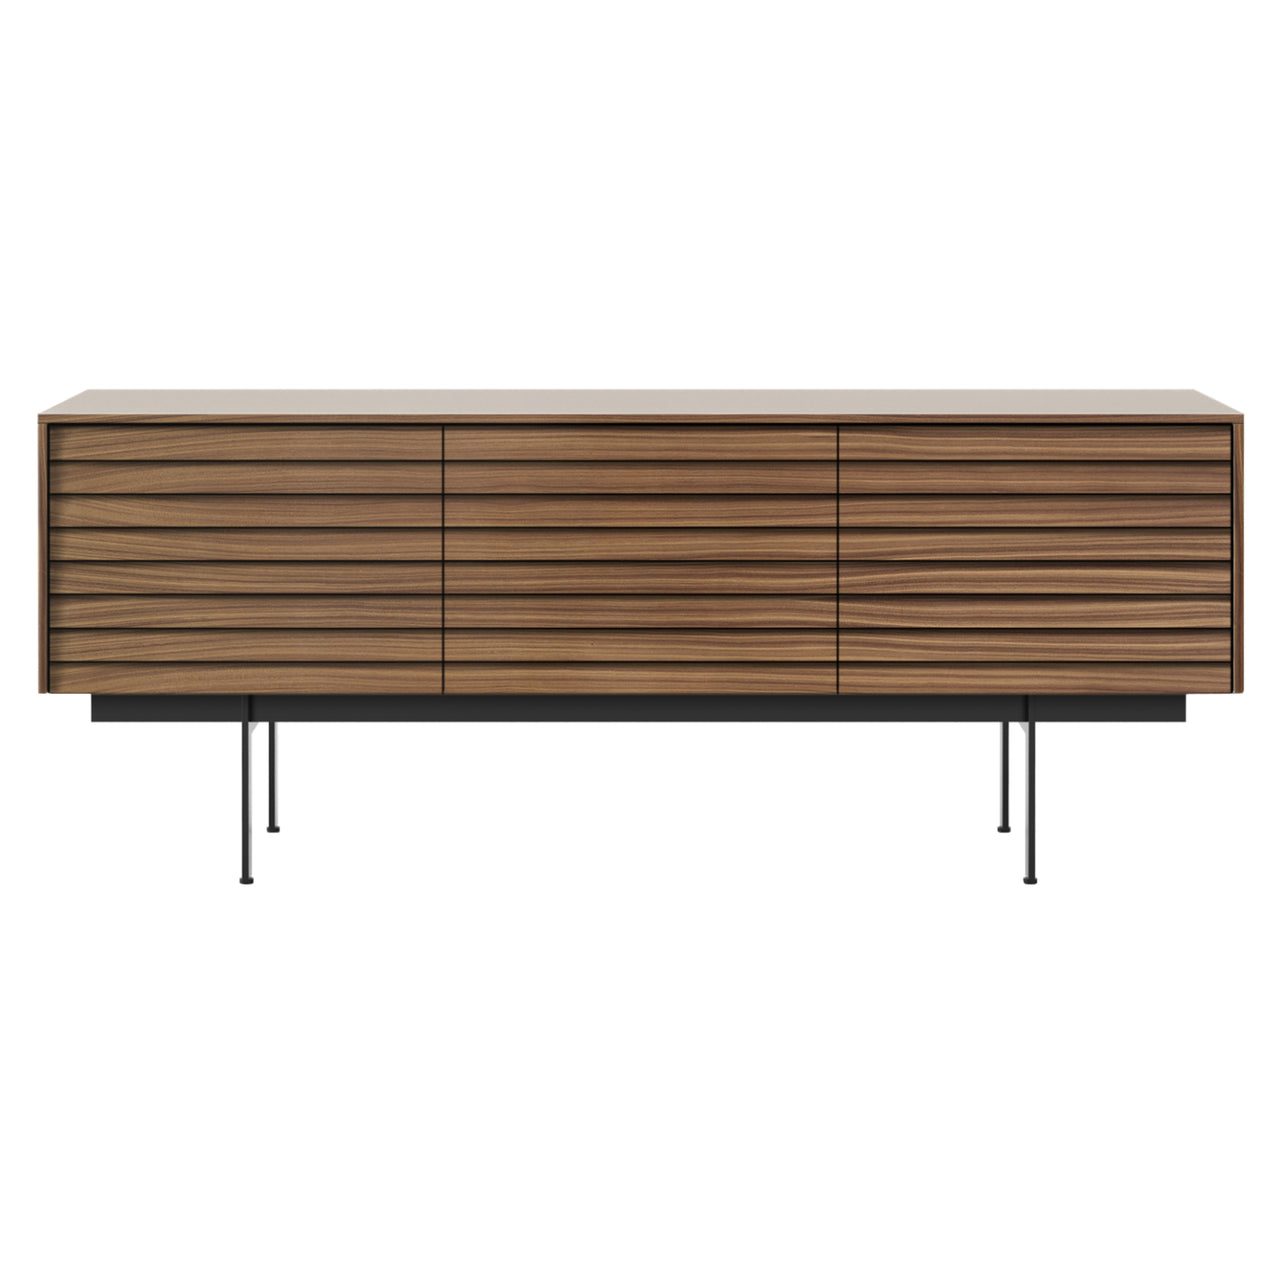 Sussex 8 Sideboard: Large - 92.8